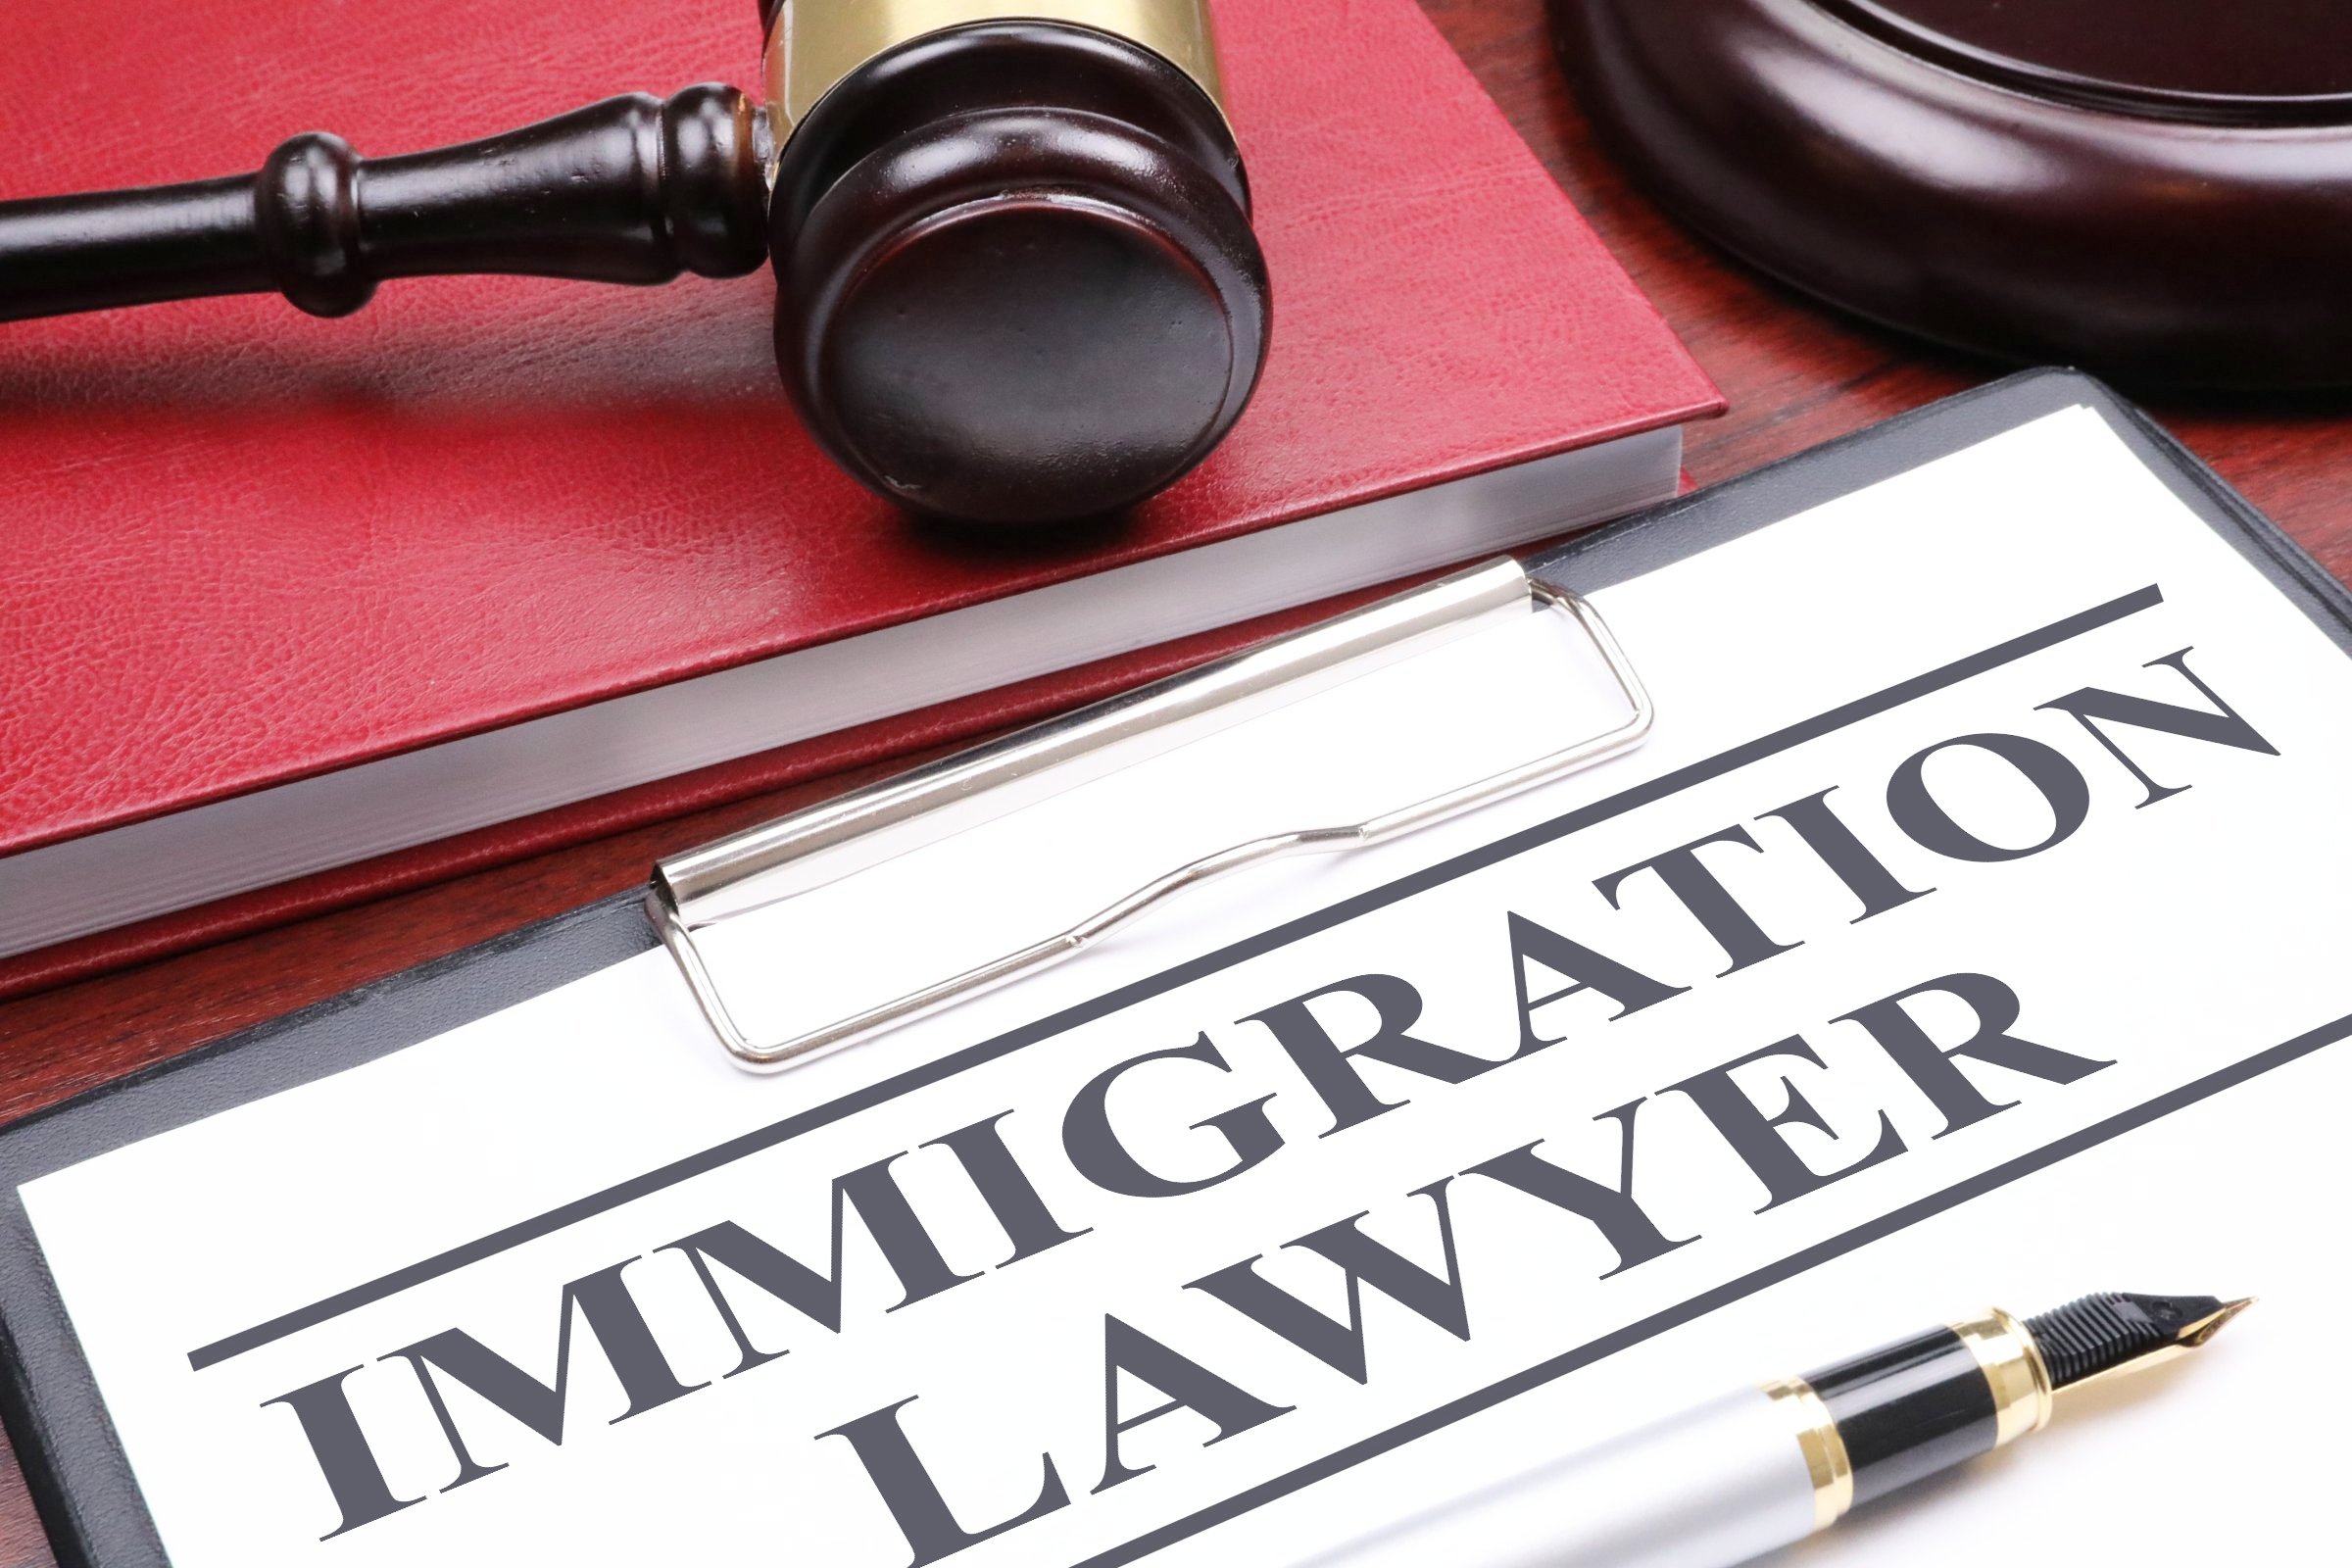 Immigration Lawyer - Free of Charge Creative Commons Legal 6 image